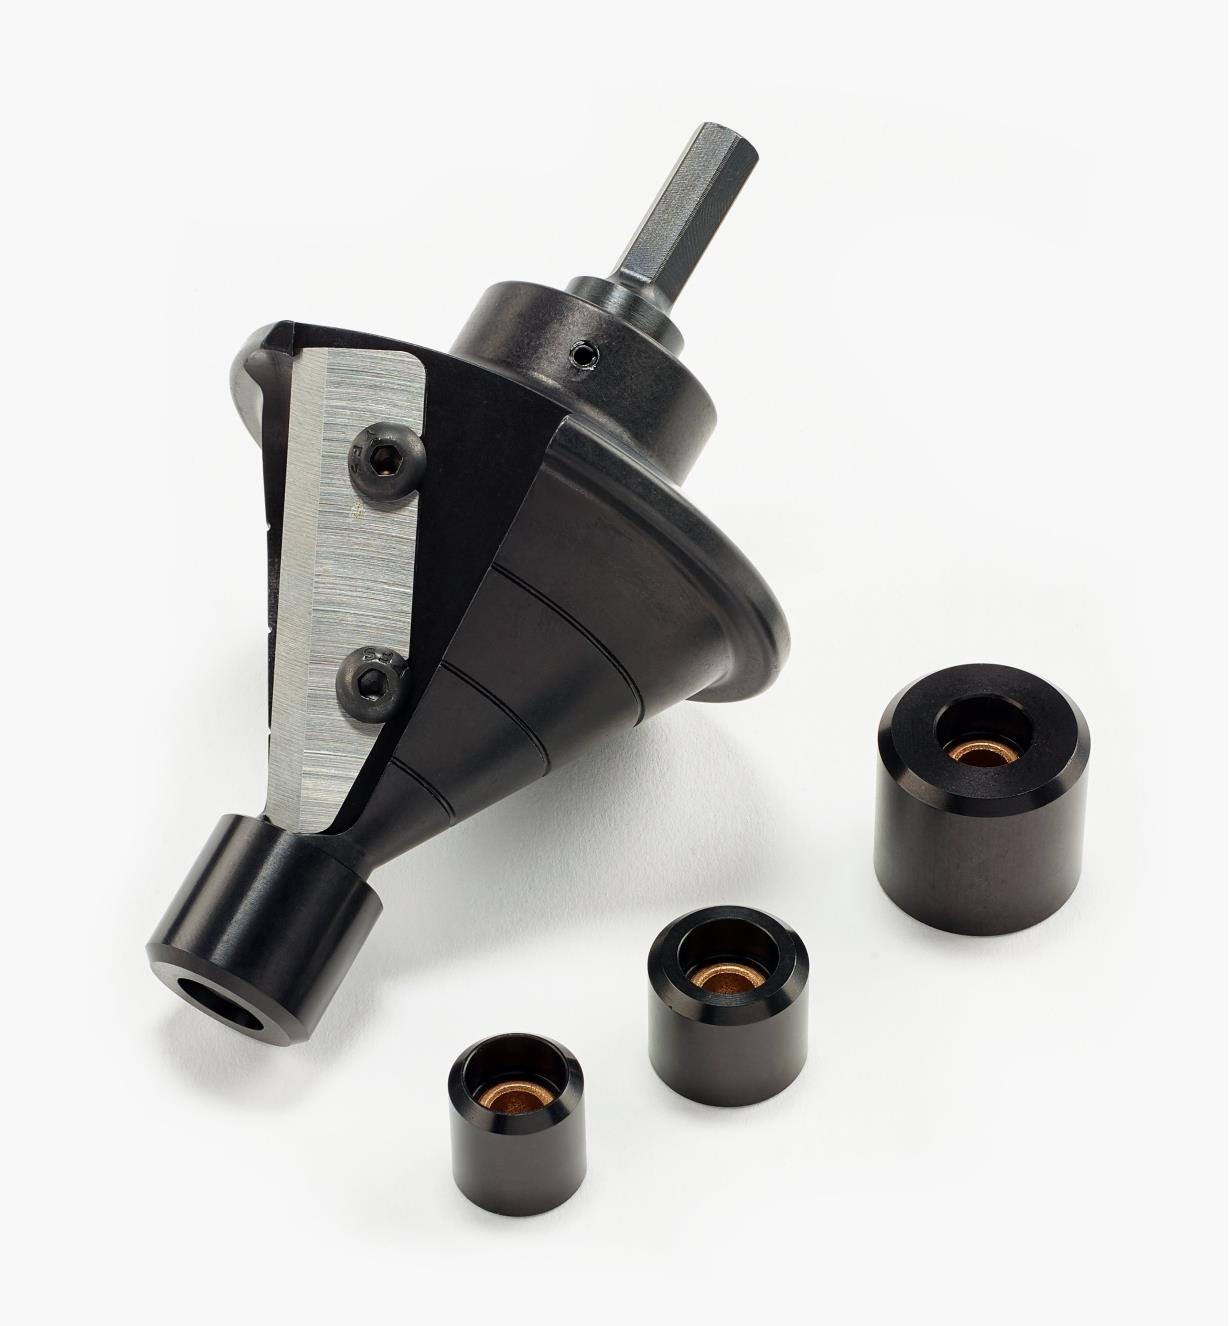 05J4650 - Small C-Sink with 5/8" to 1" Bushings